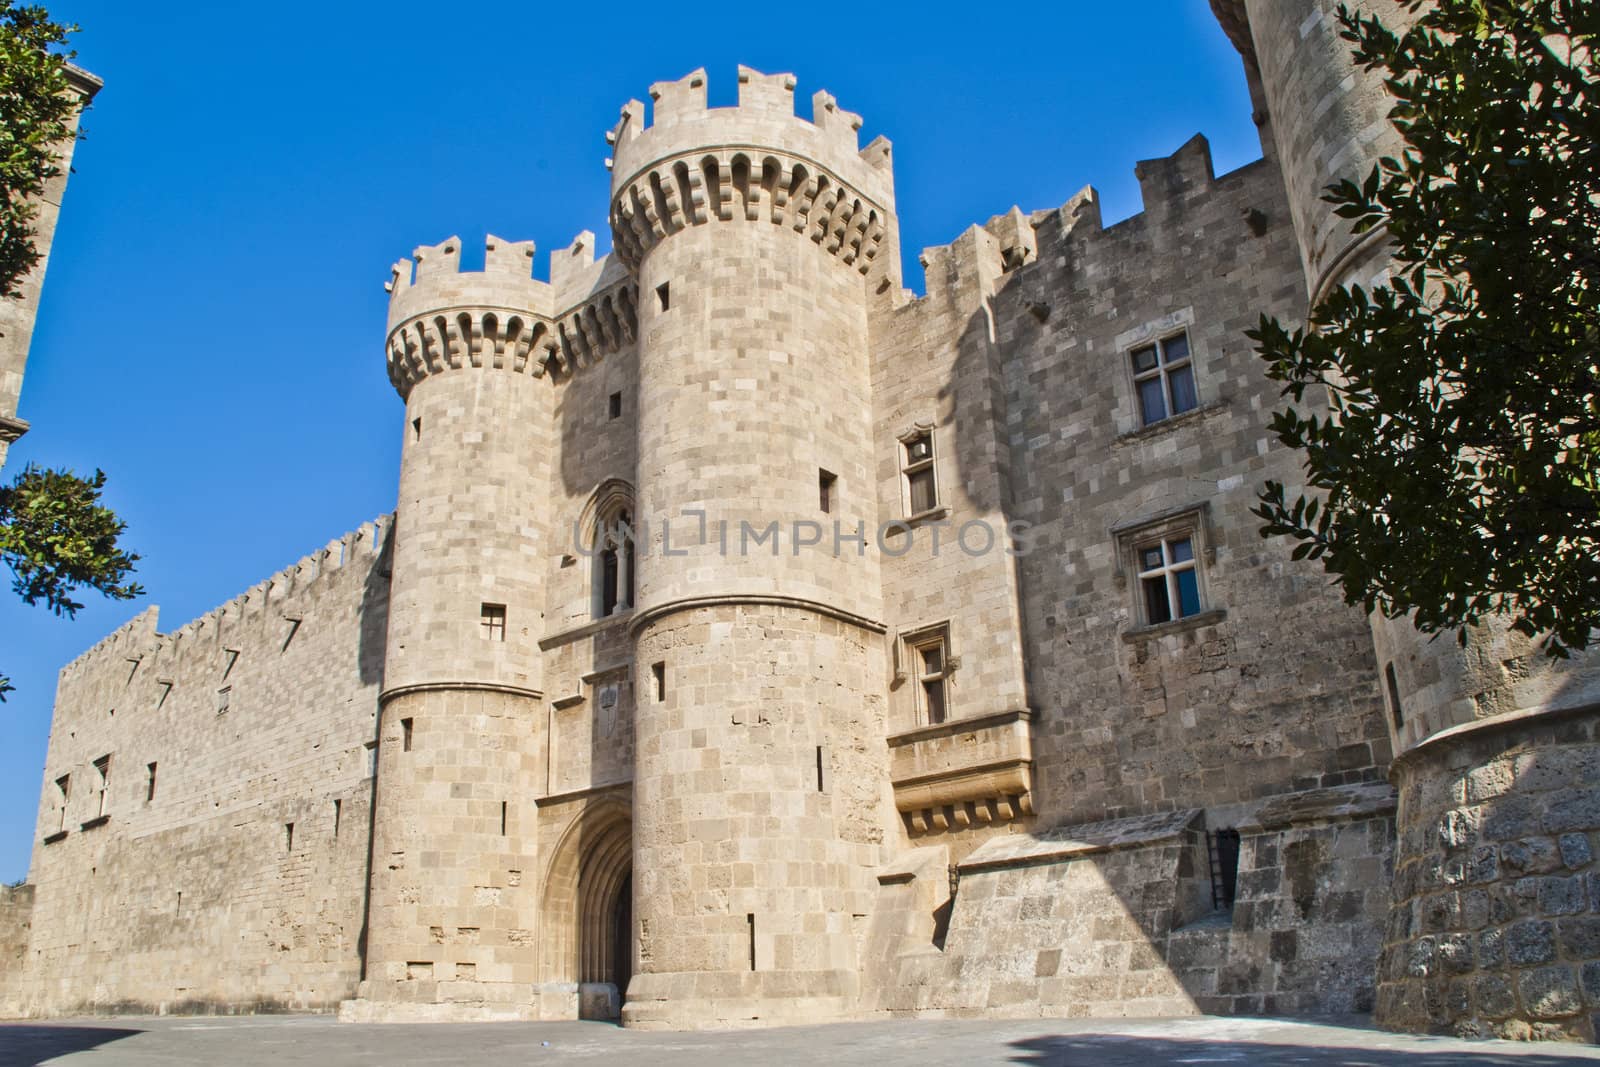 palace of the grand master of the knights of rhodes was built in the 14th century and is situated in the old town of rhodes, greece, picture shows the main entrance